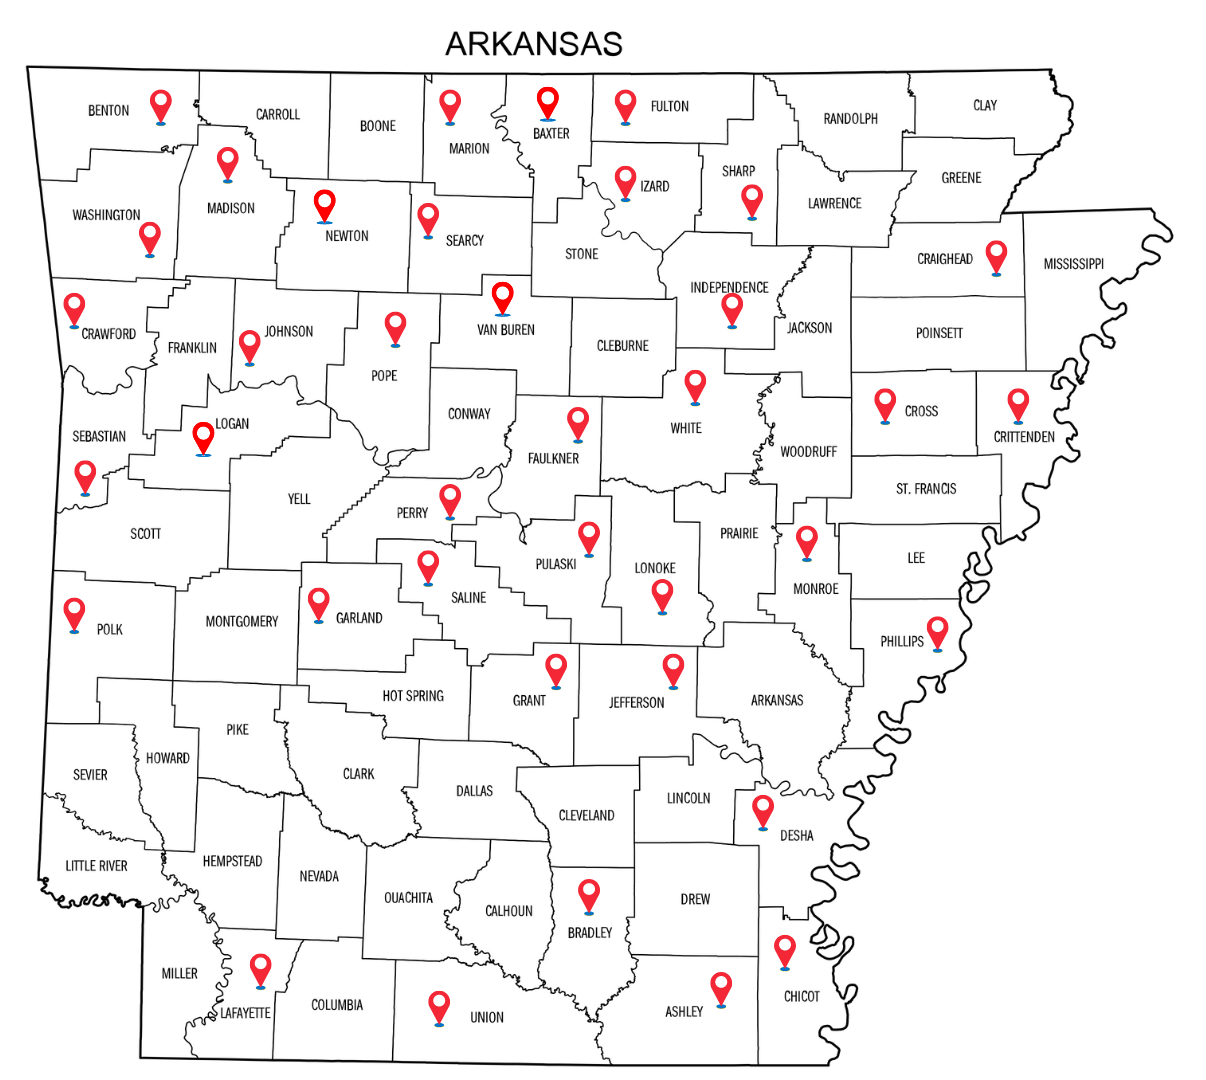 the Arkansas state map divided into counties with location icons showing each county where the mobile maker space has visited